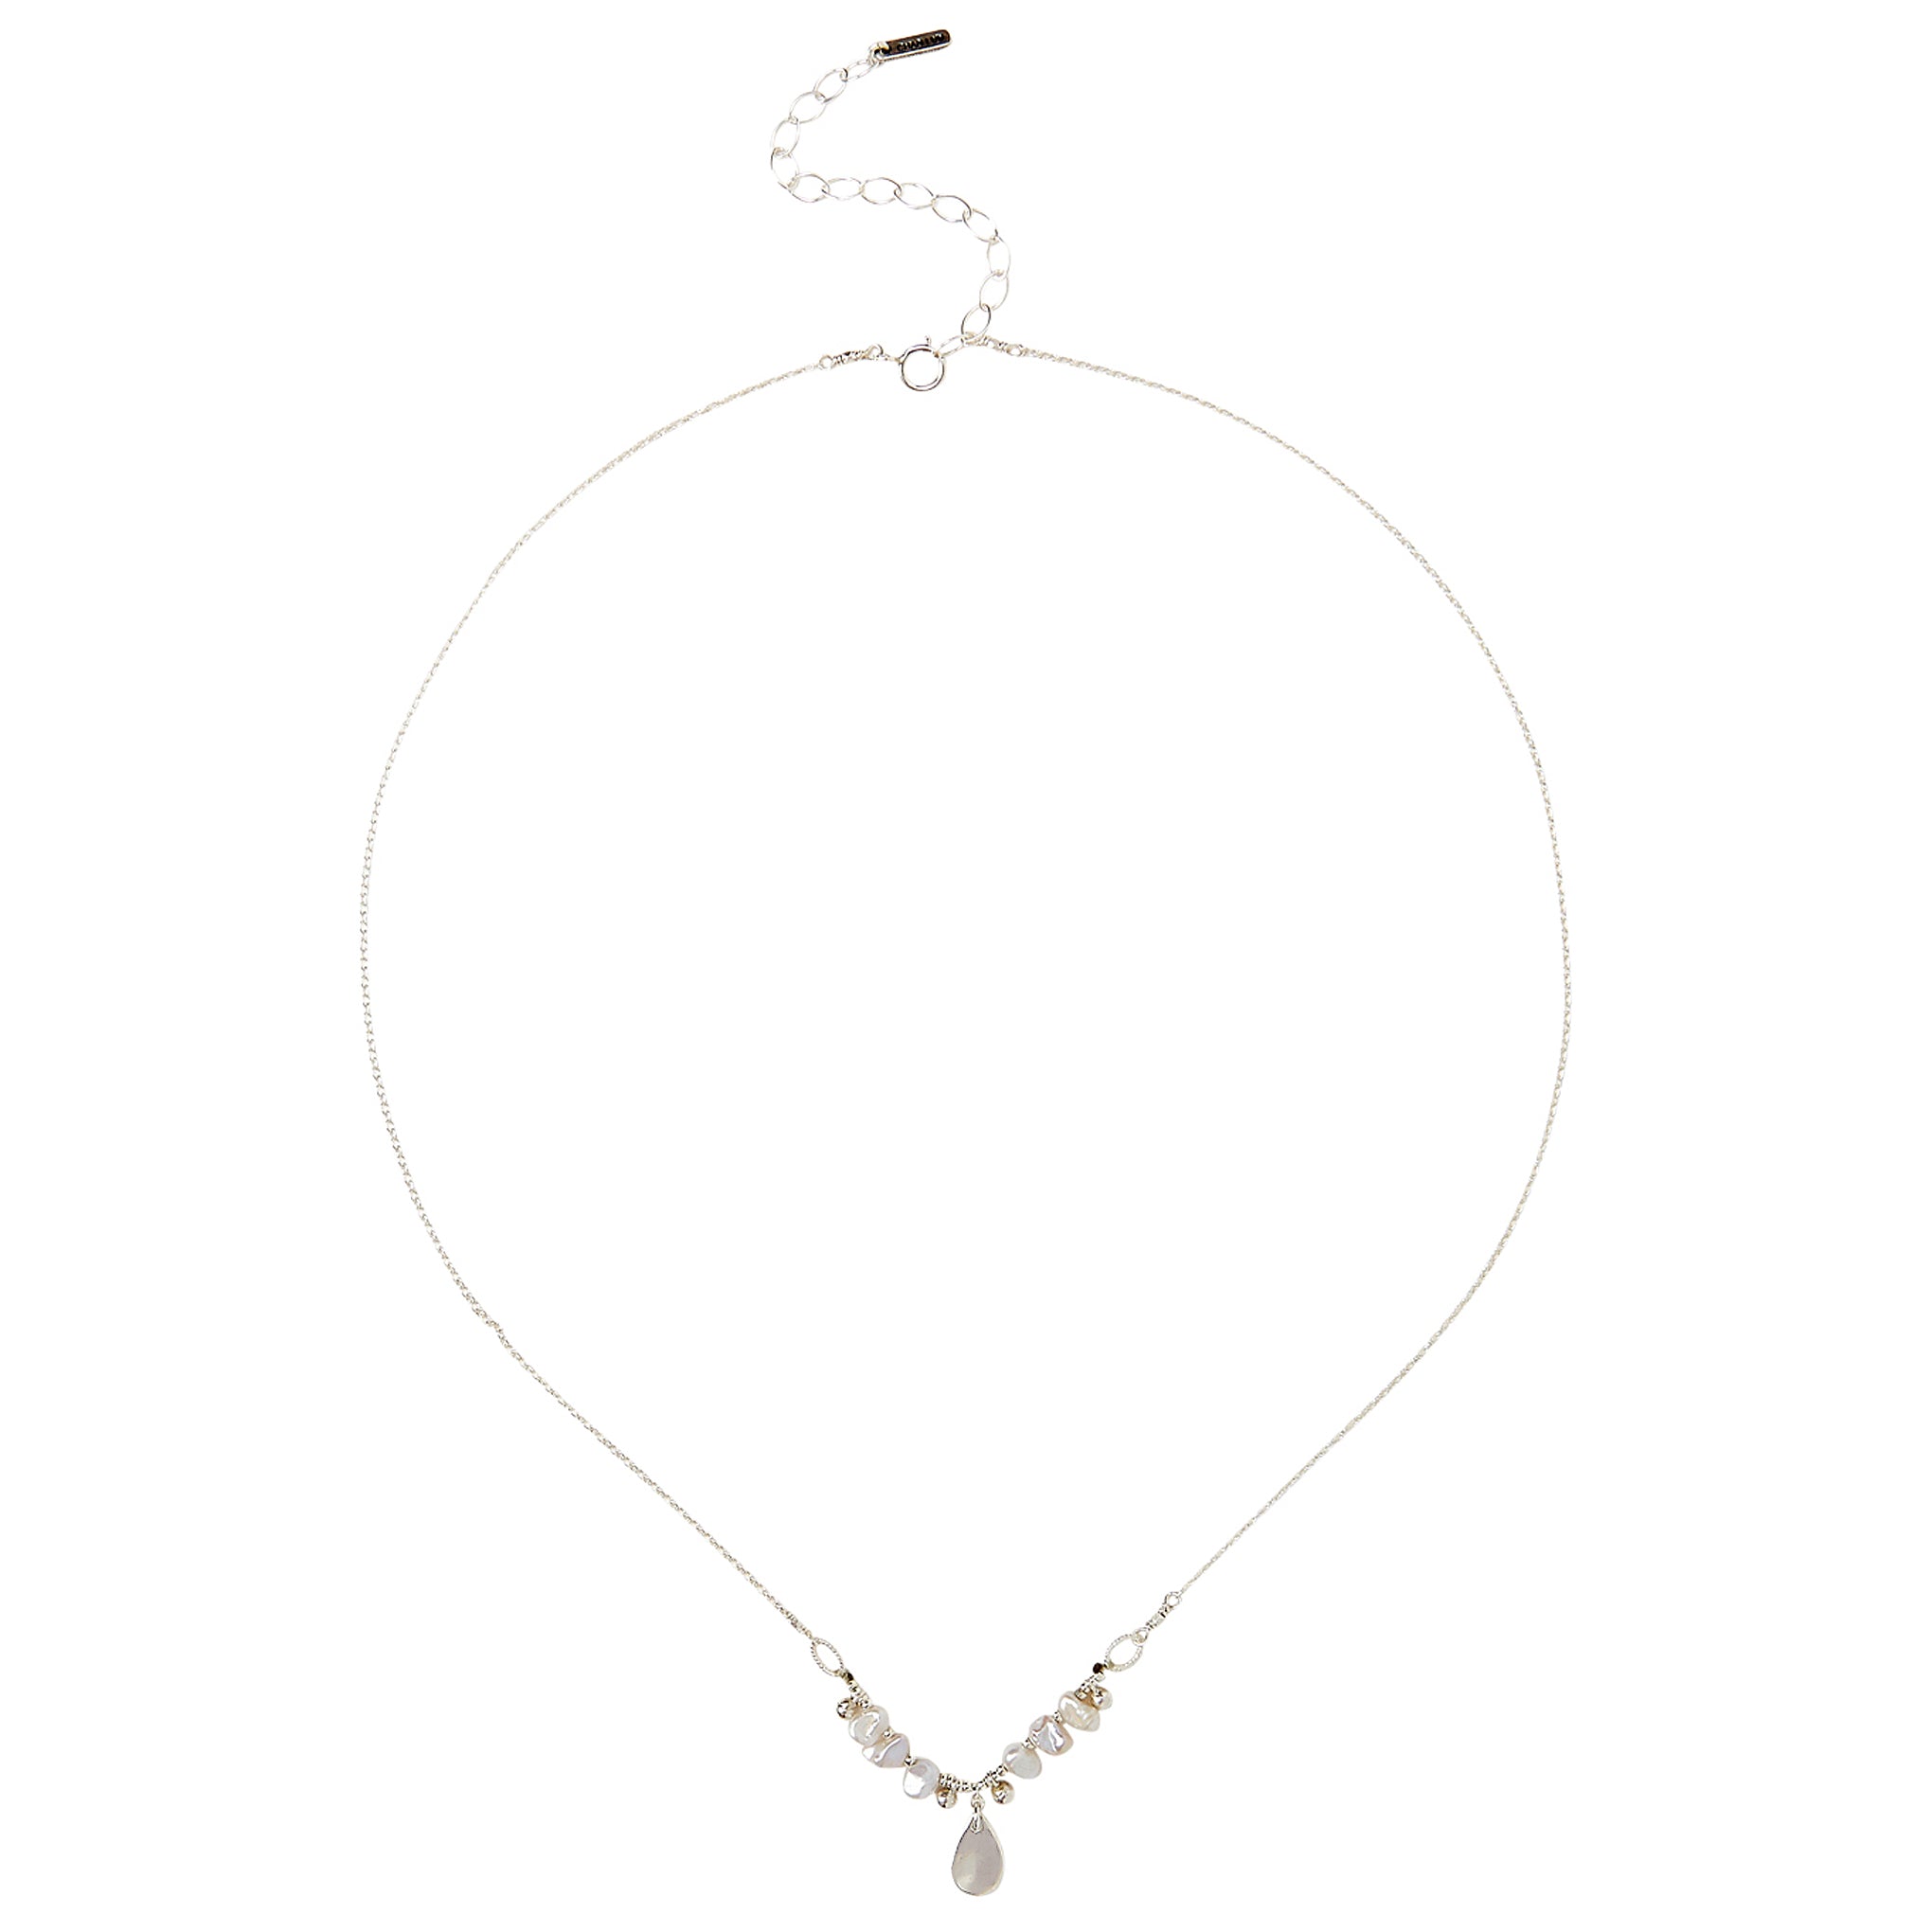 Chan Luu Tiara Pearl Pendant Necklace in Light Grey Pearl and Silver